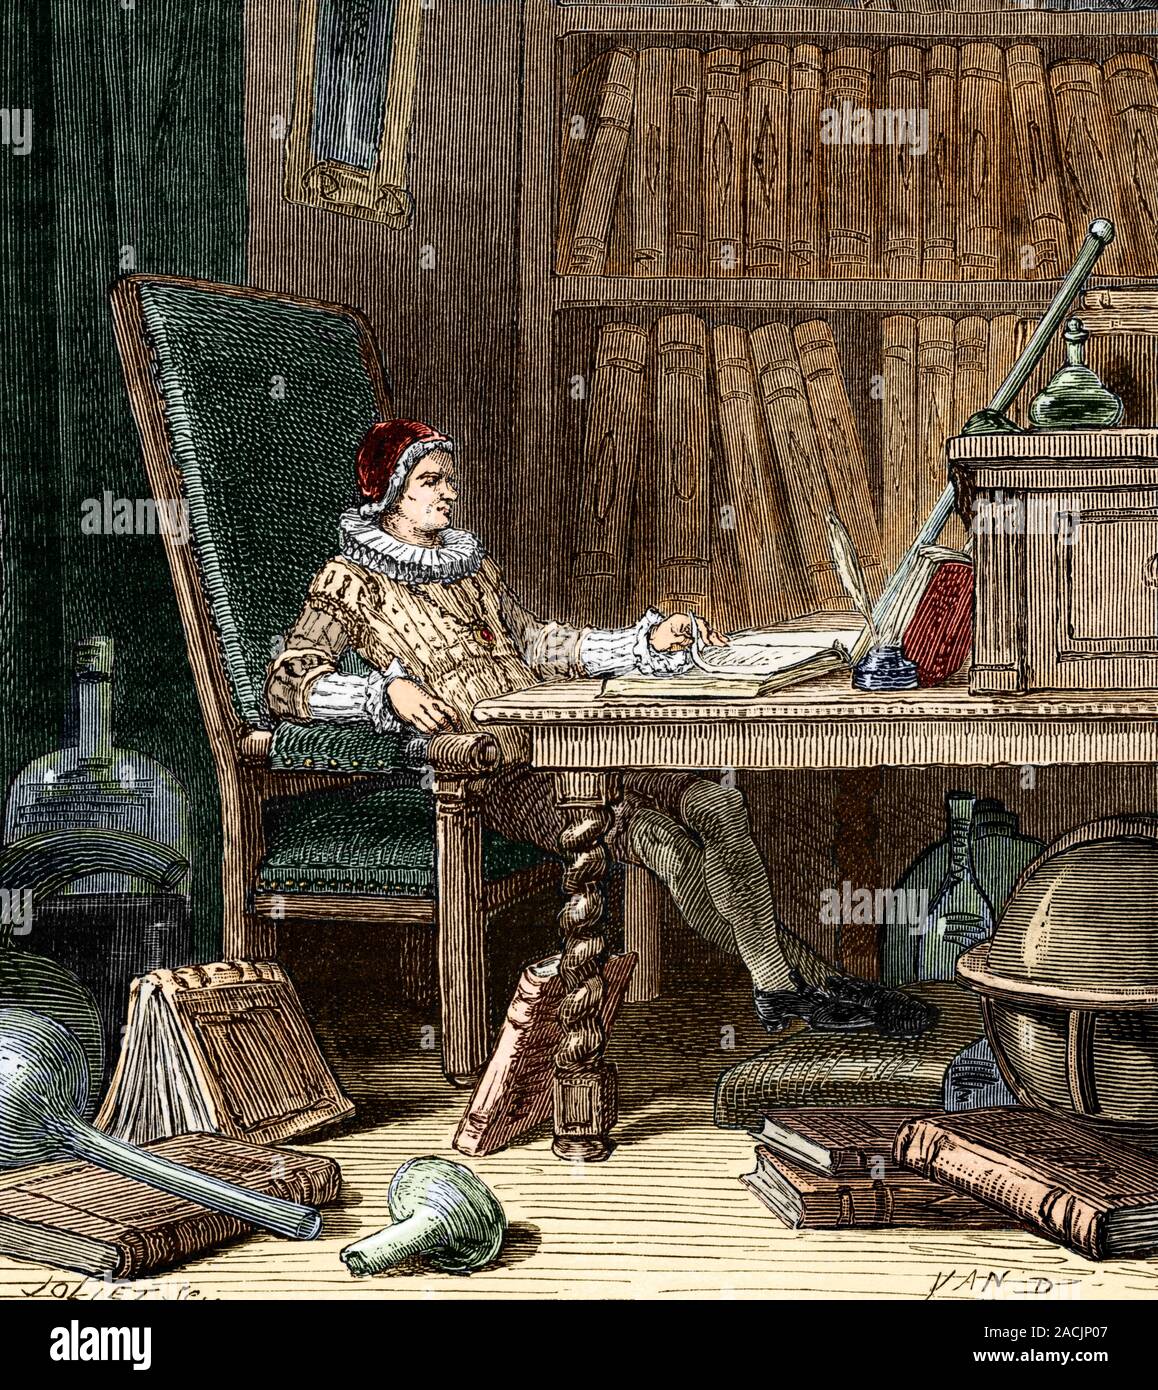 William Gilbert, English physician and physicist shown with his book De  Magnete, Magneticisique Corporibus, et de Magno Magnete Tellure (On the  Magnet Stock Photo - Alamy